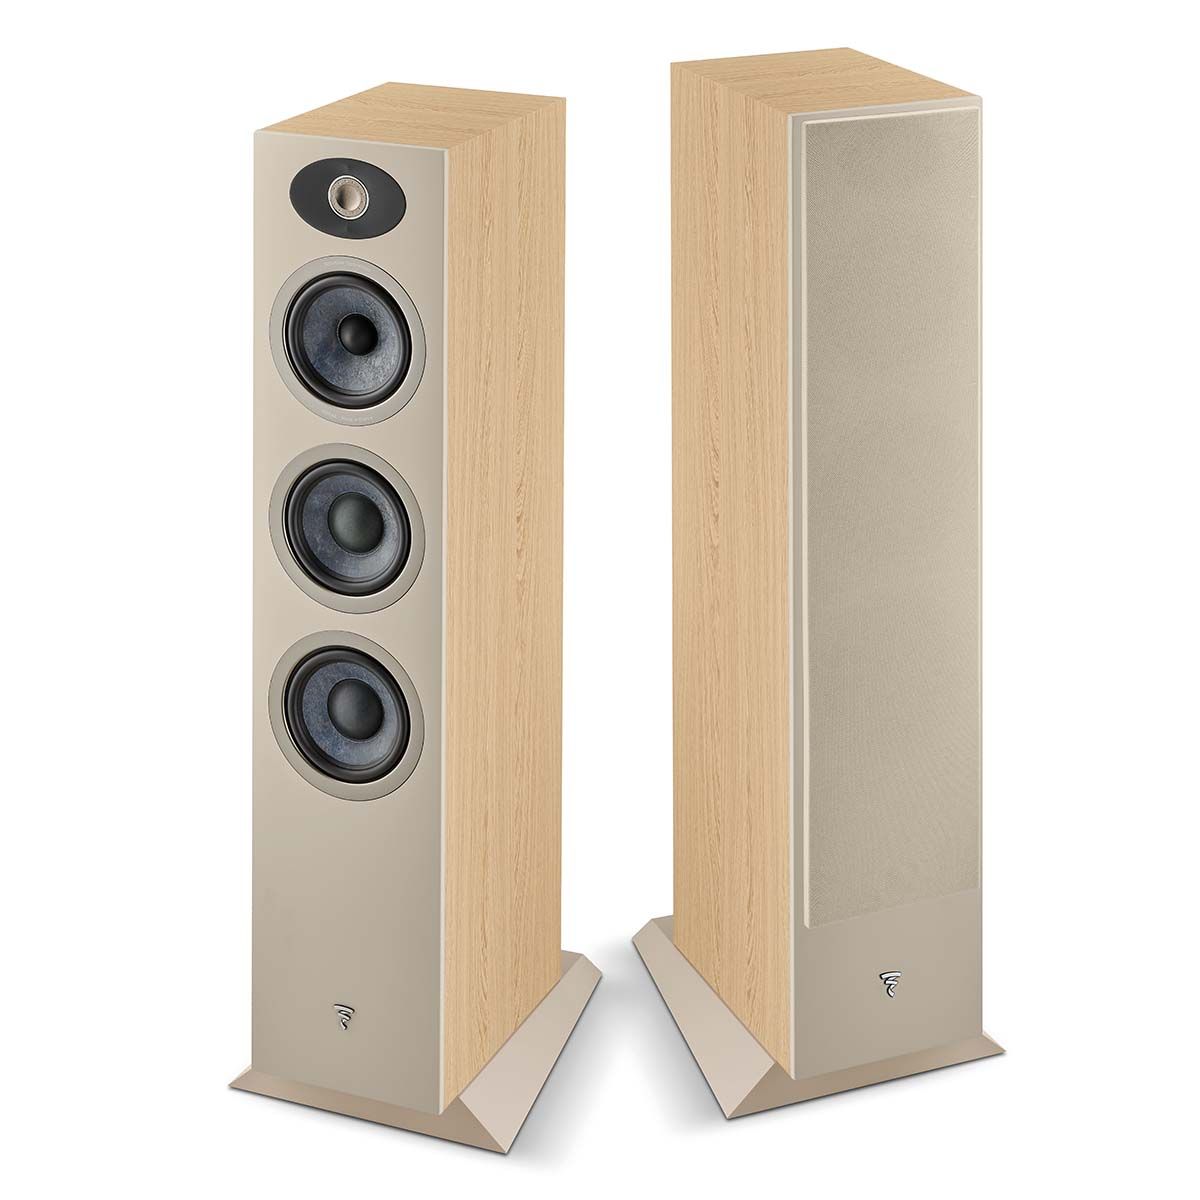 Focal Theva No2 Floorstanding Speaker - Each - view of light wood pair, one with grille, one without grille